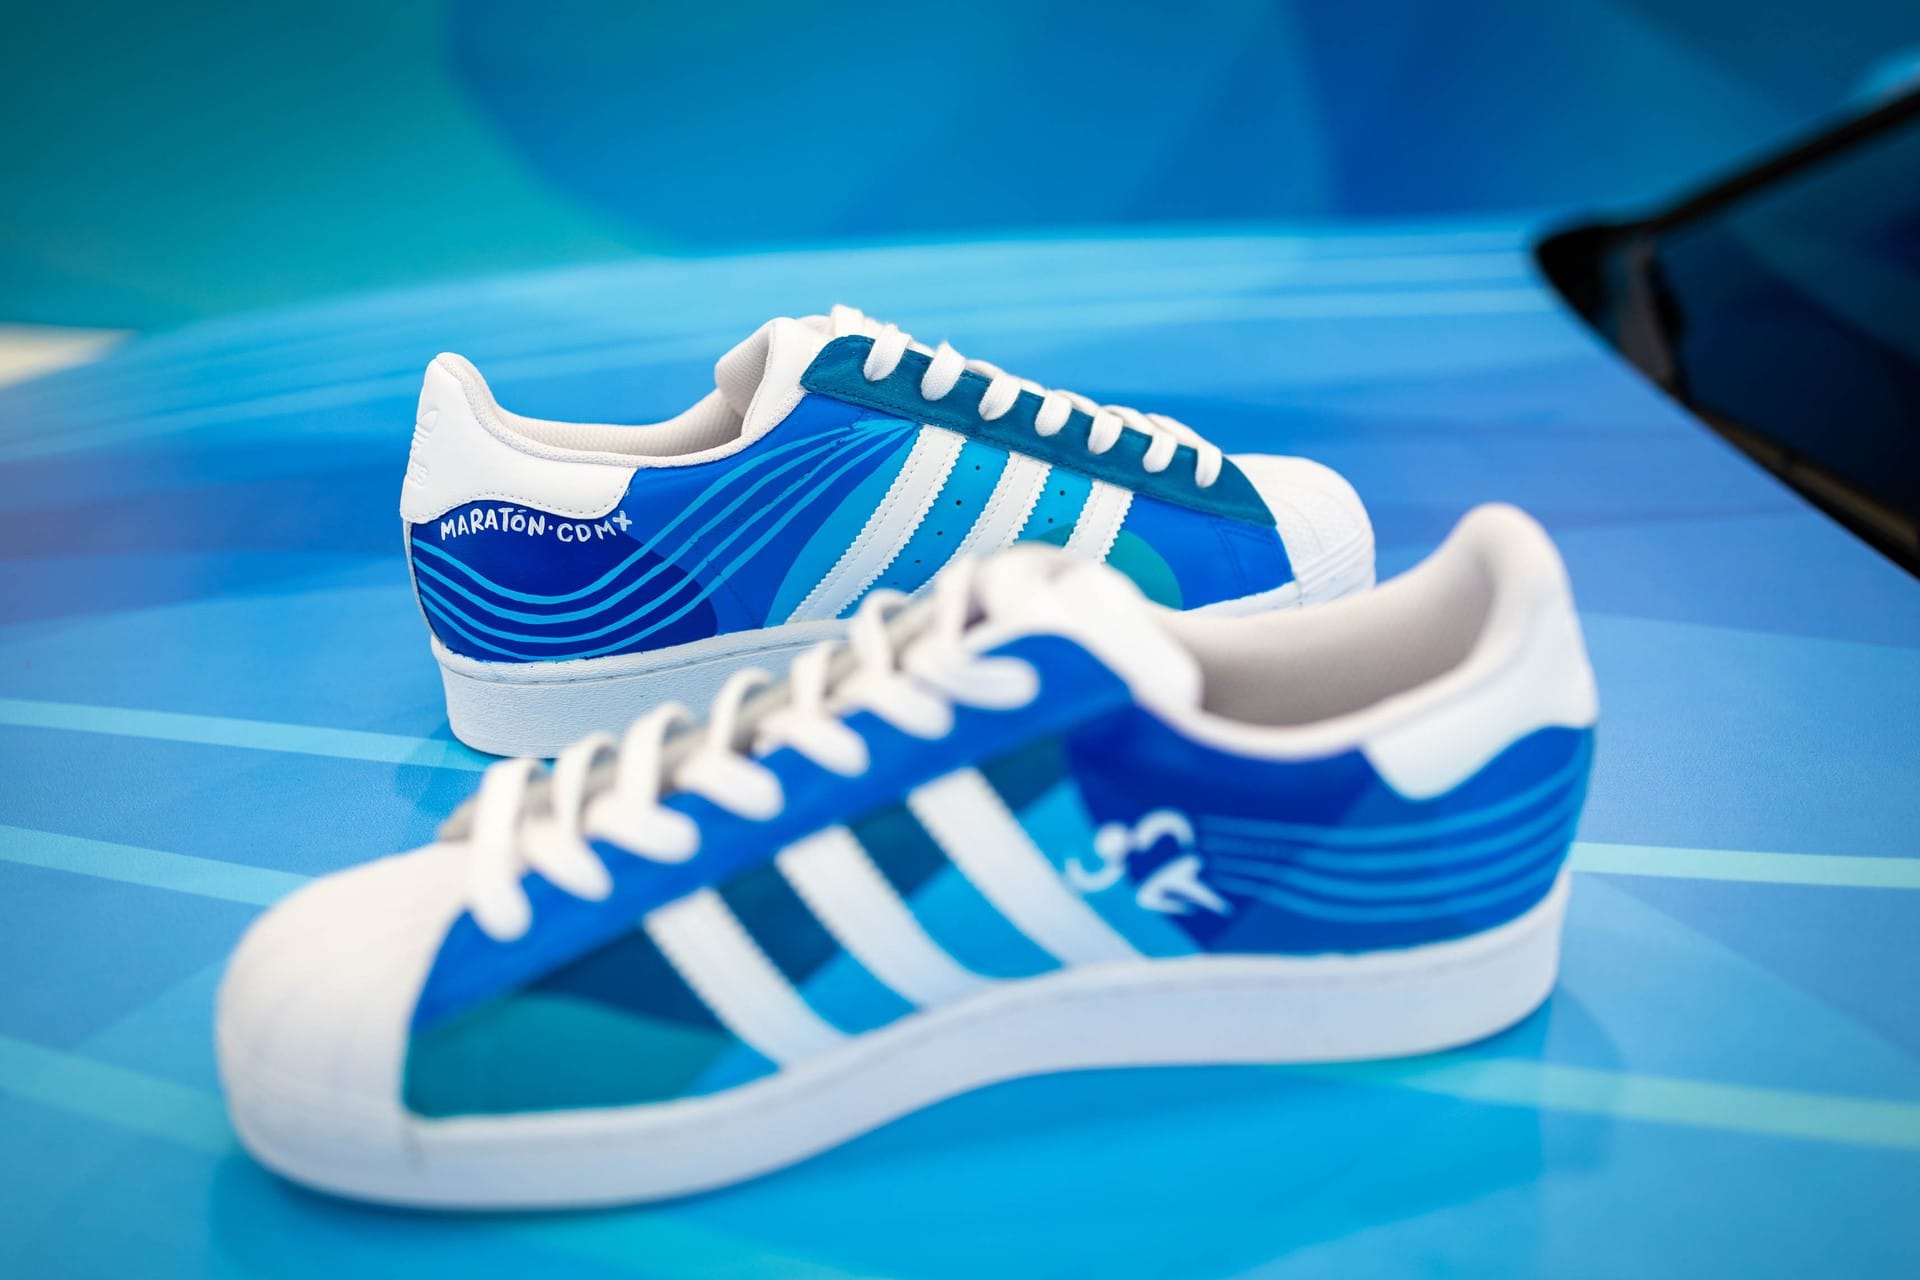 Substantial growth strap BMW x Adidas releases limited edition Superstar tennis sneakers